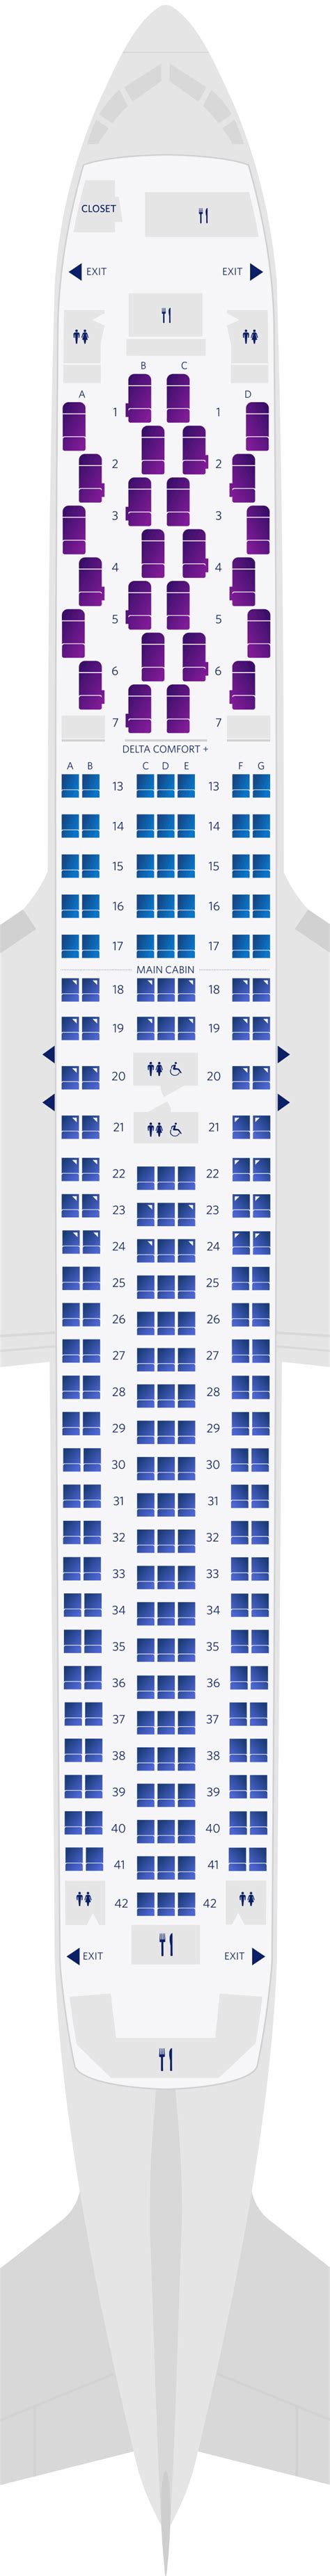 Boeing 767-300 Seating Chart